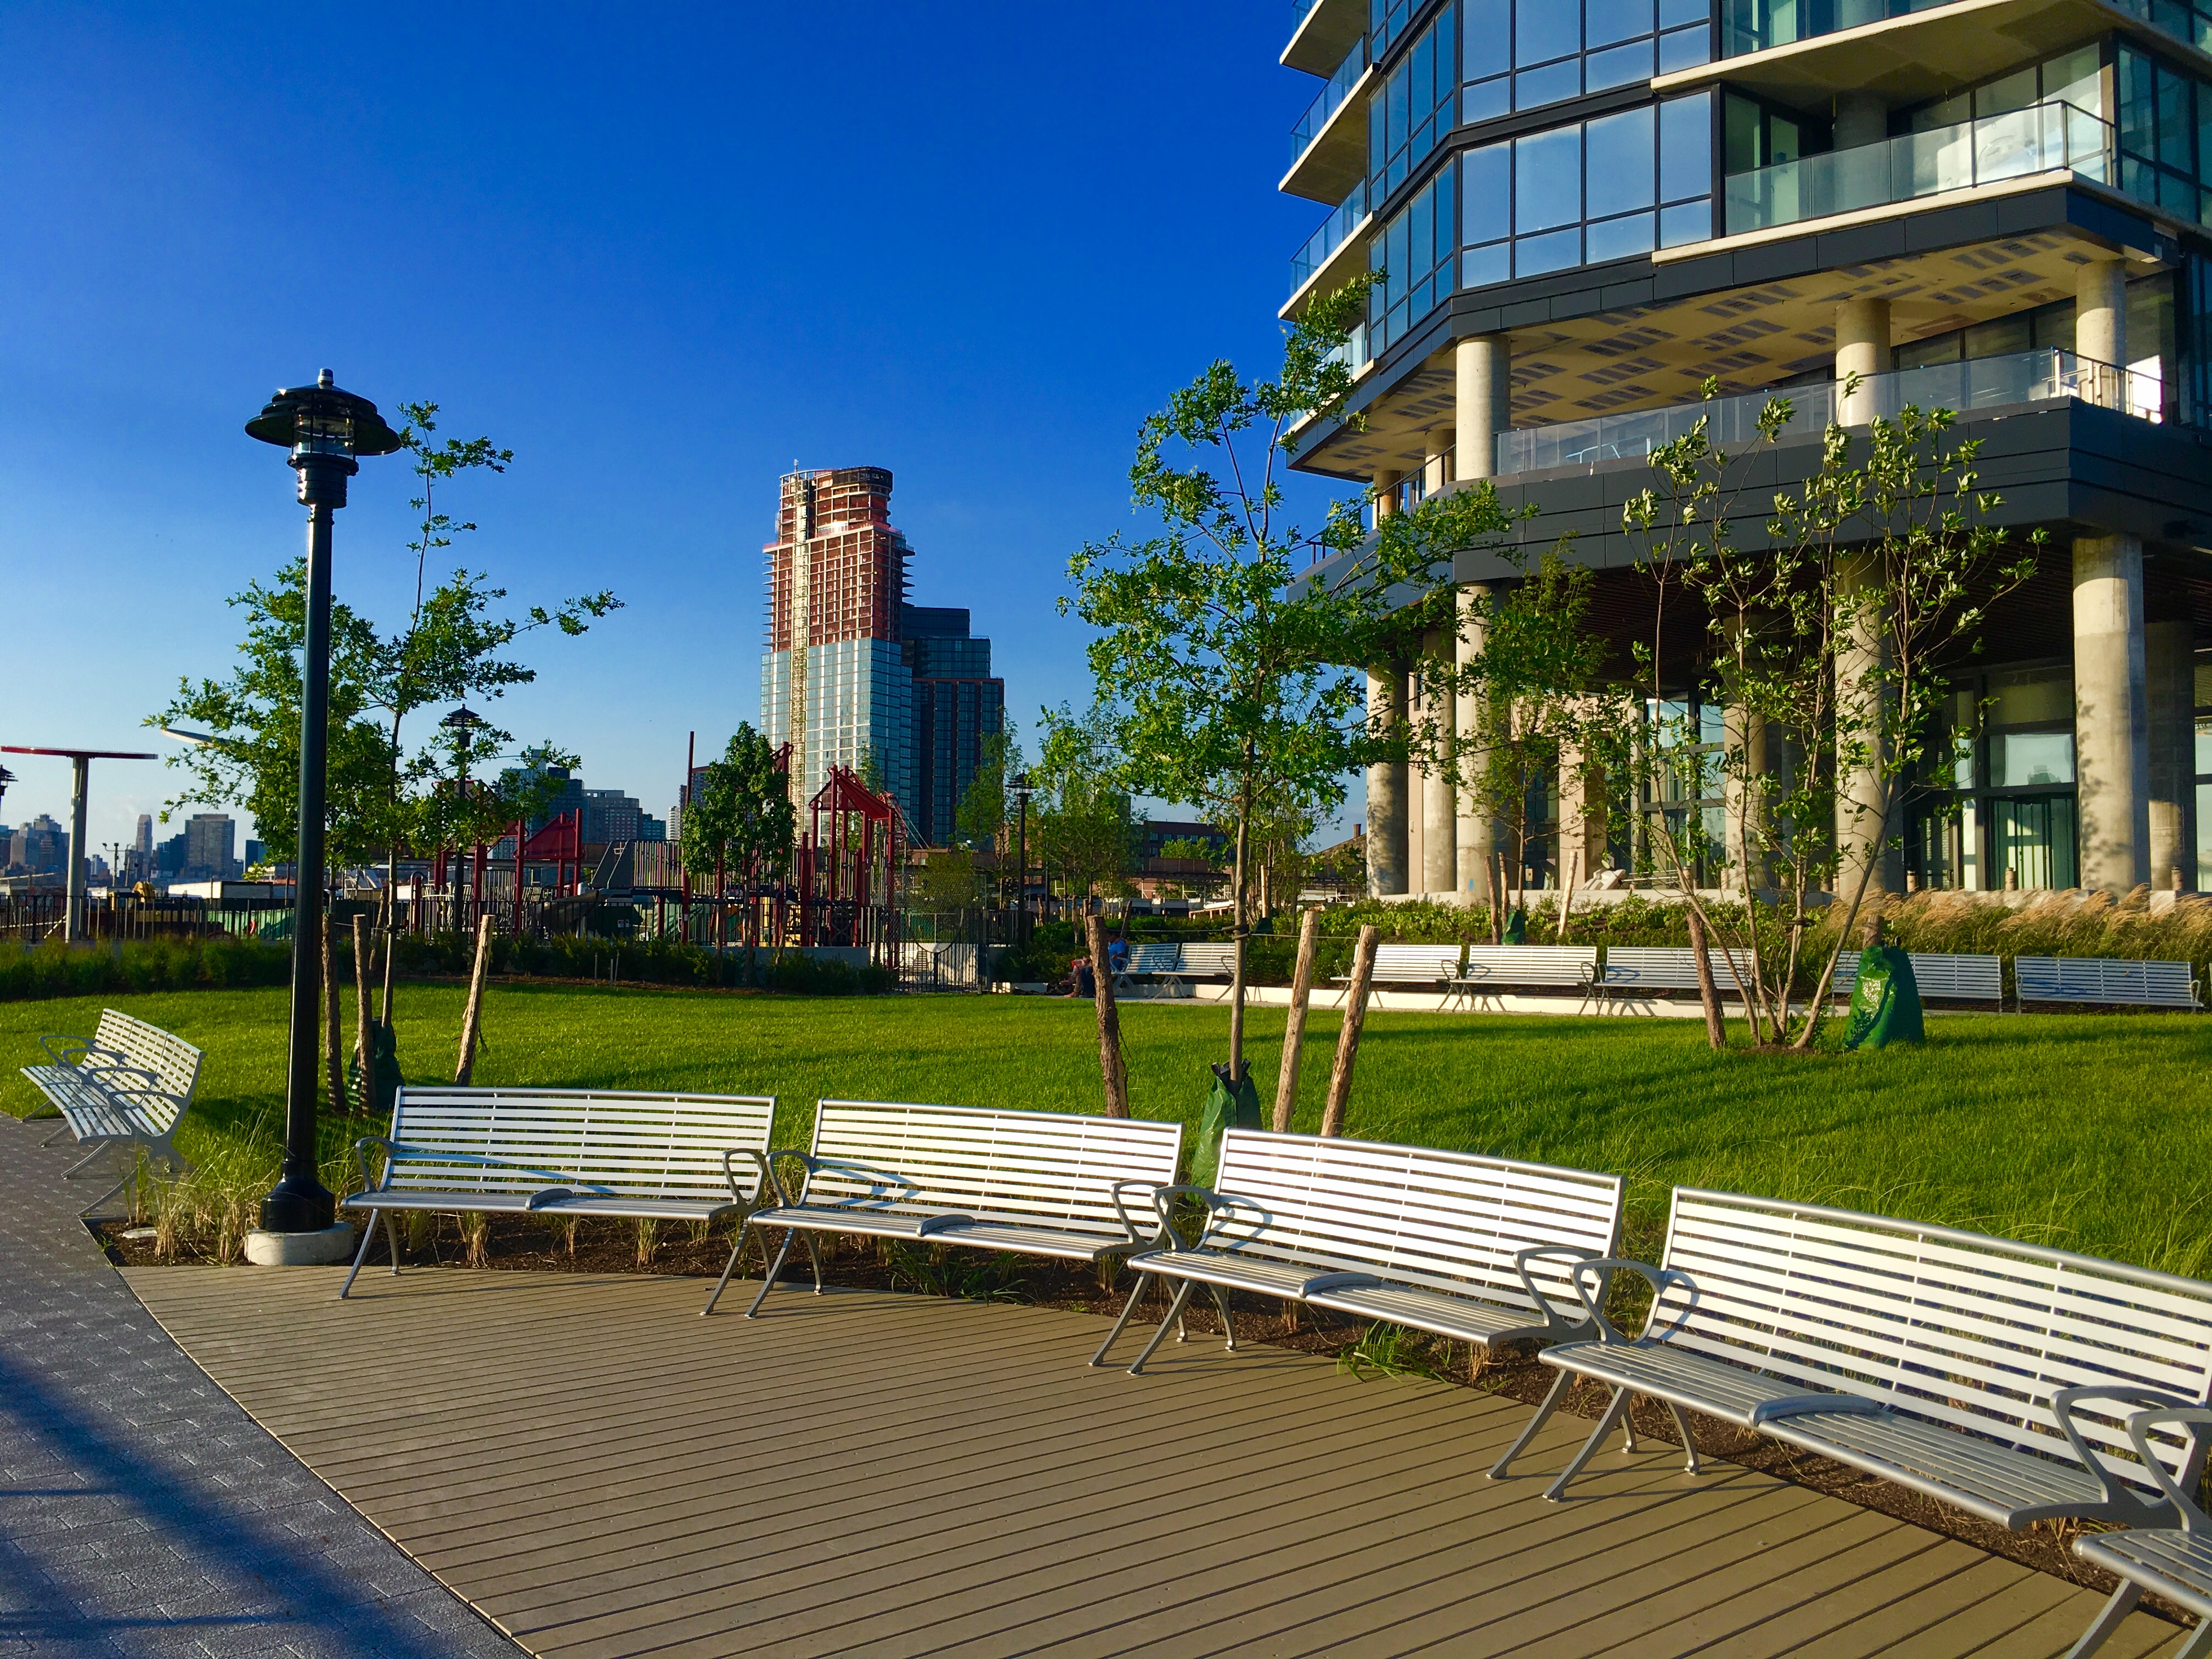 This appealing public waterfront space is located in front of a residential tower called The Greenpoint. Eagle photo by Lore Croghan